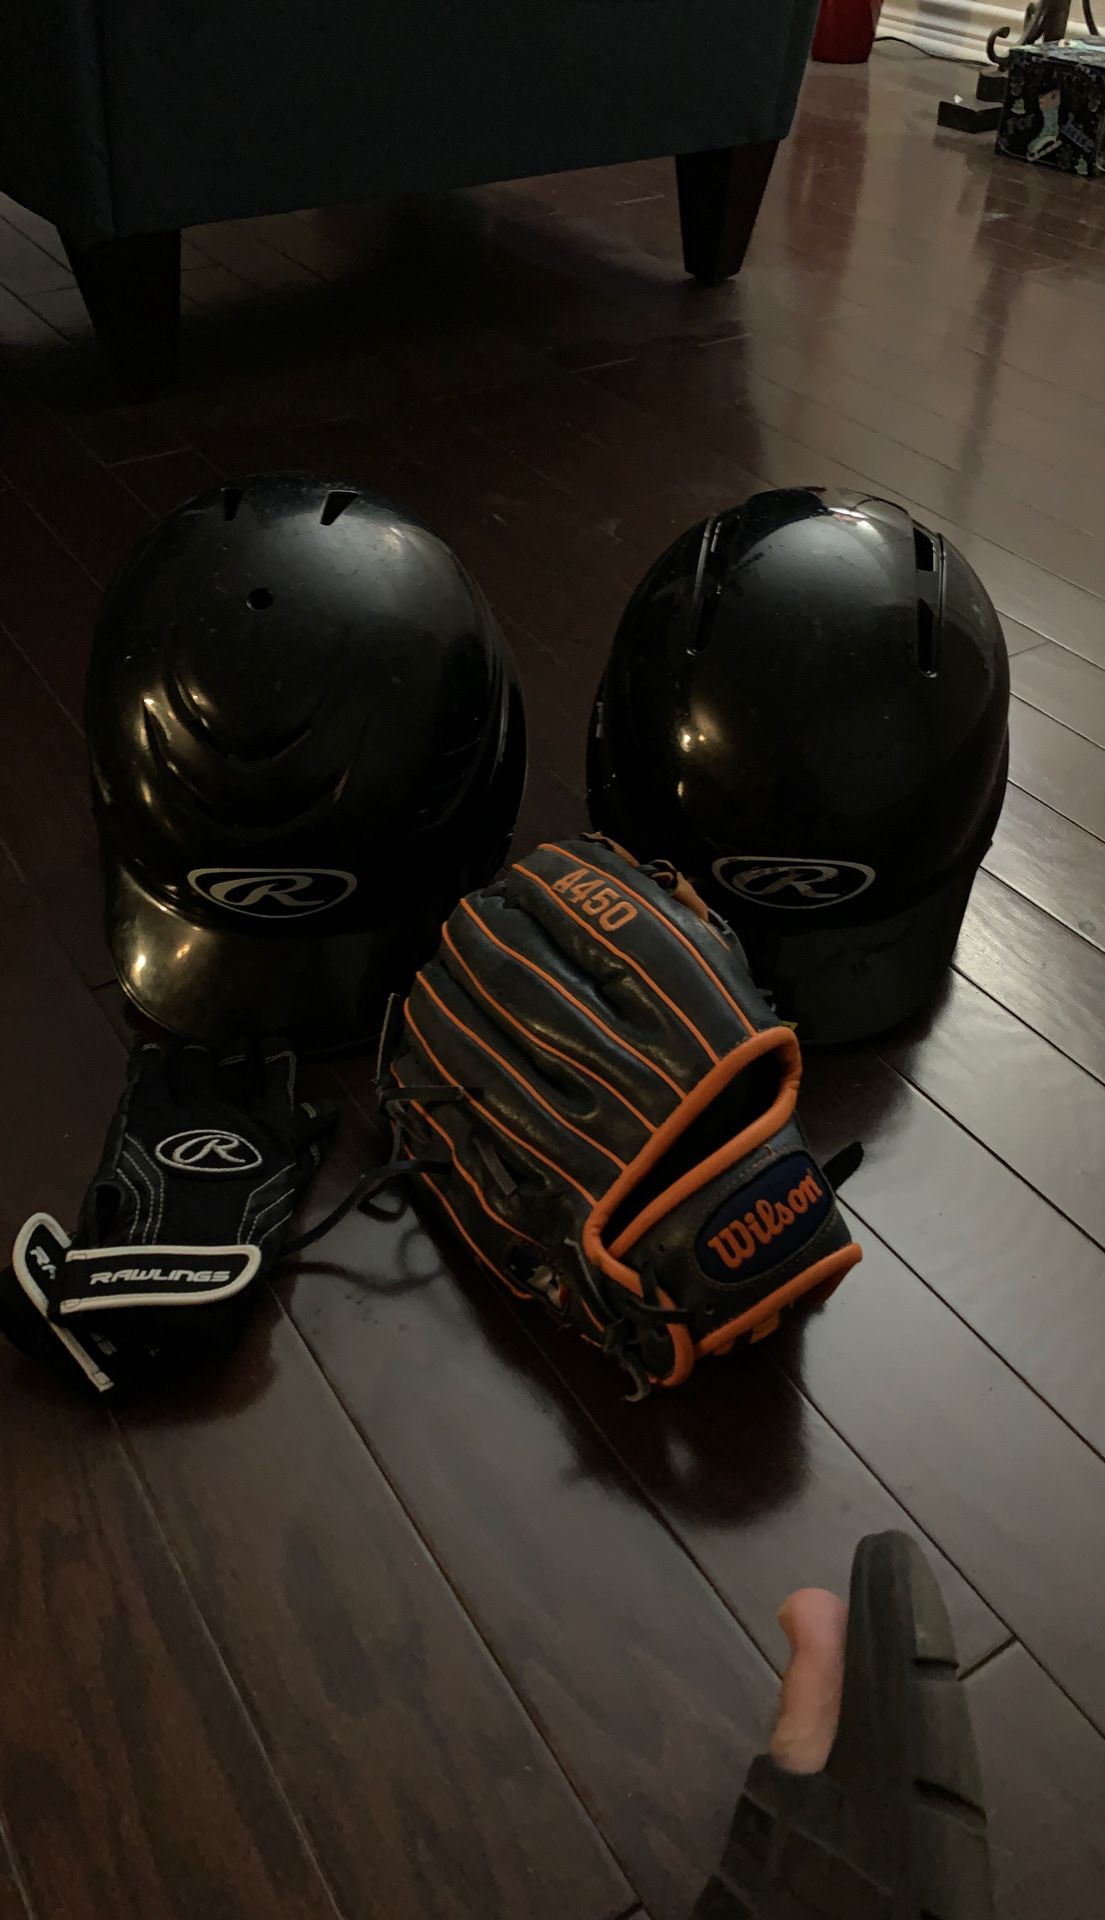 2 Rawlings helmets. 1 Wilson Left Hand glove A 450 in good condition